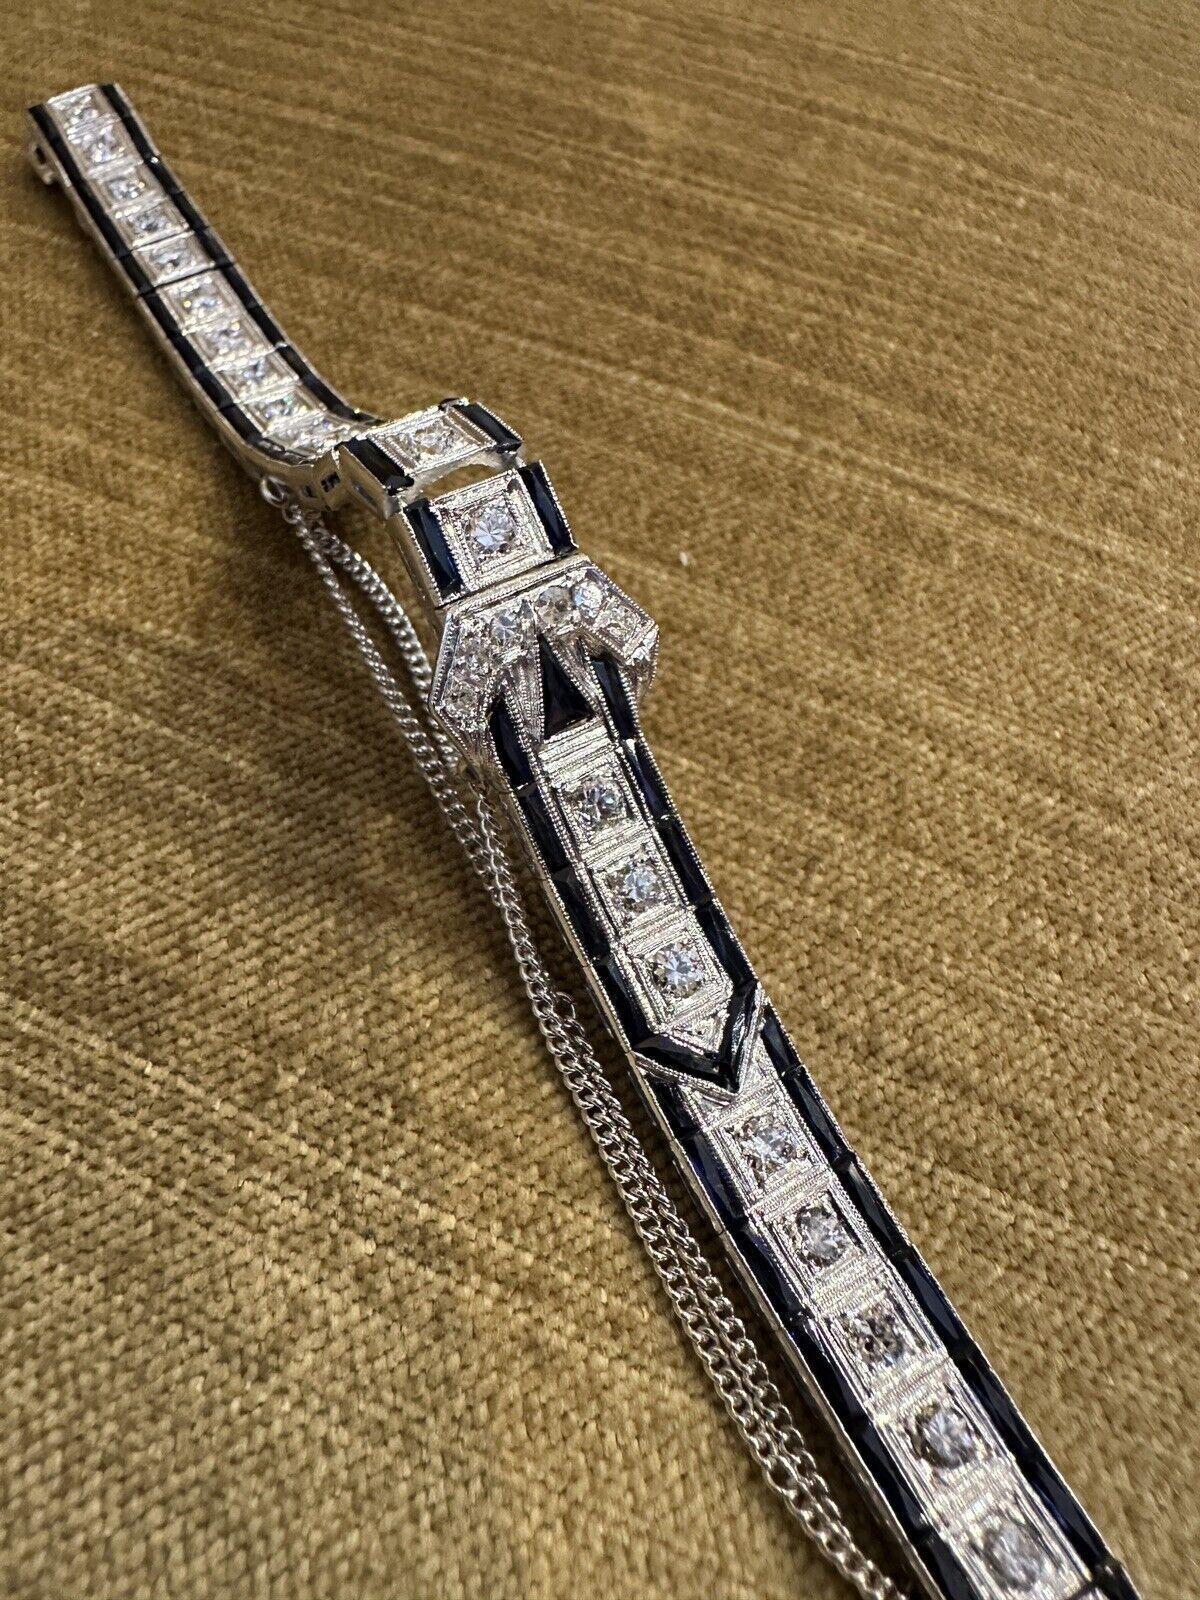 Art Deco Platinum Diamond Buckle Line Bracelet 

Platinum Art Deco Line Bracelet features a single row of 31 Old Cut Round Diamonds and Faceted Blue Stones, possibly synthetic or natural sapphires, on either side with a Buckle Design in center all